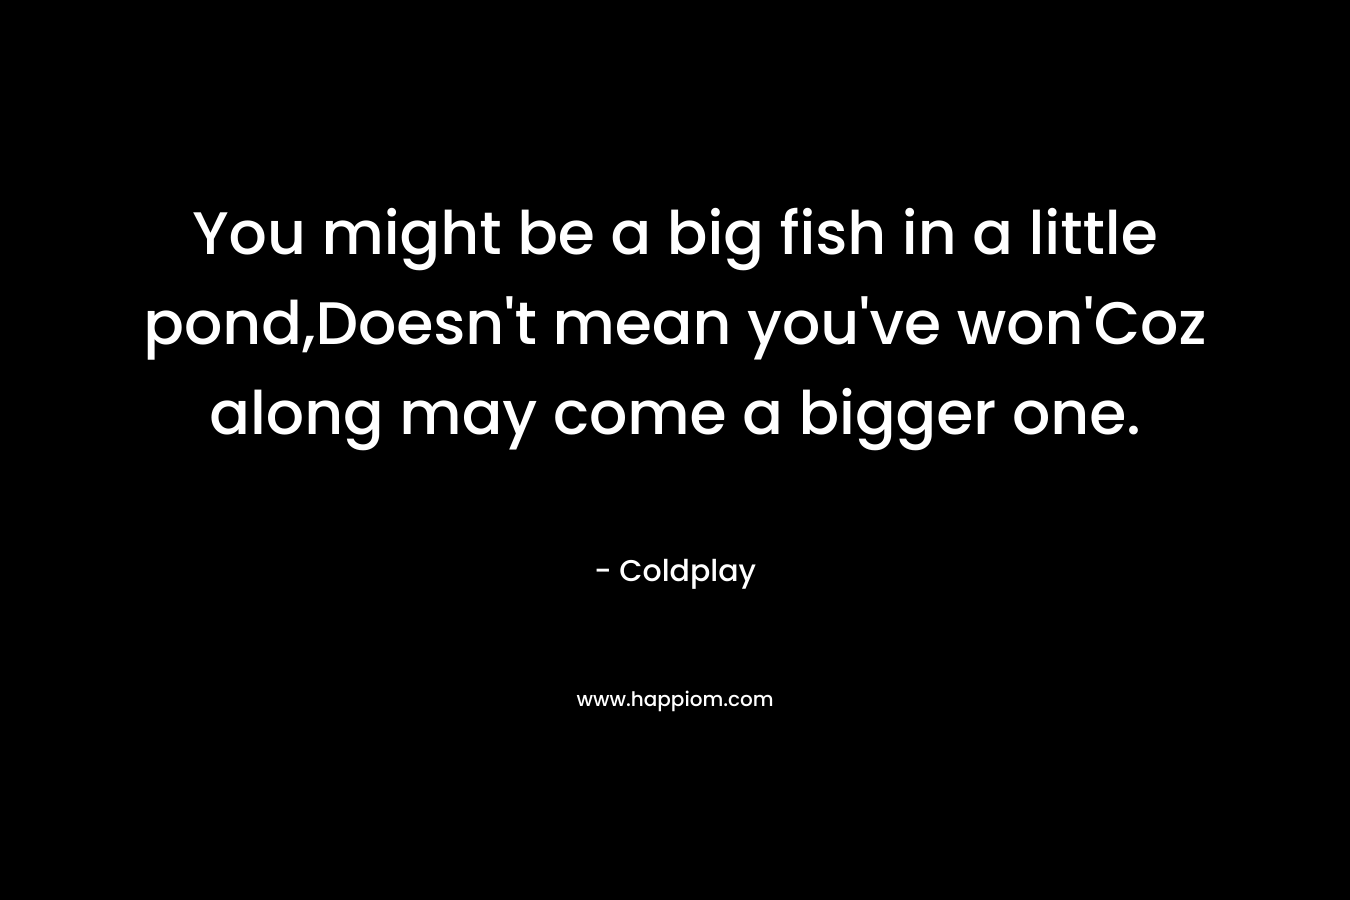 You might be a big fish in a little pond,Doesn't mean you've won'Coz along may come a bigger one.